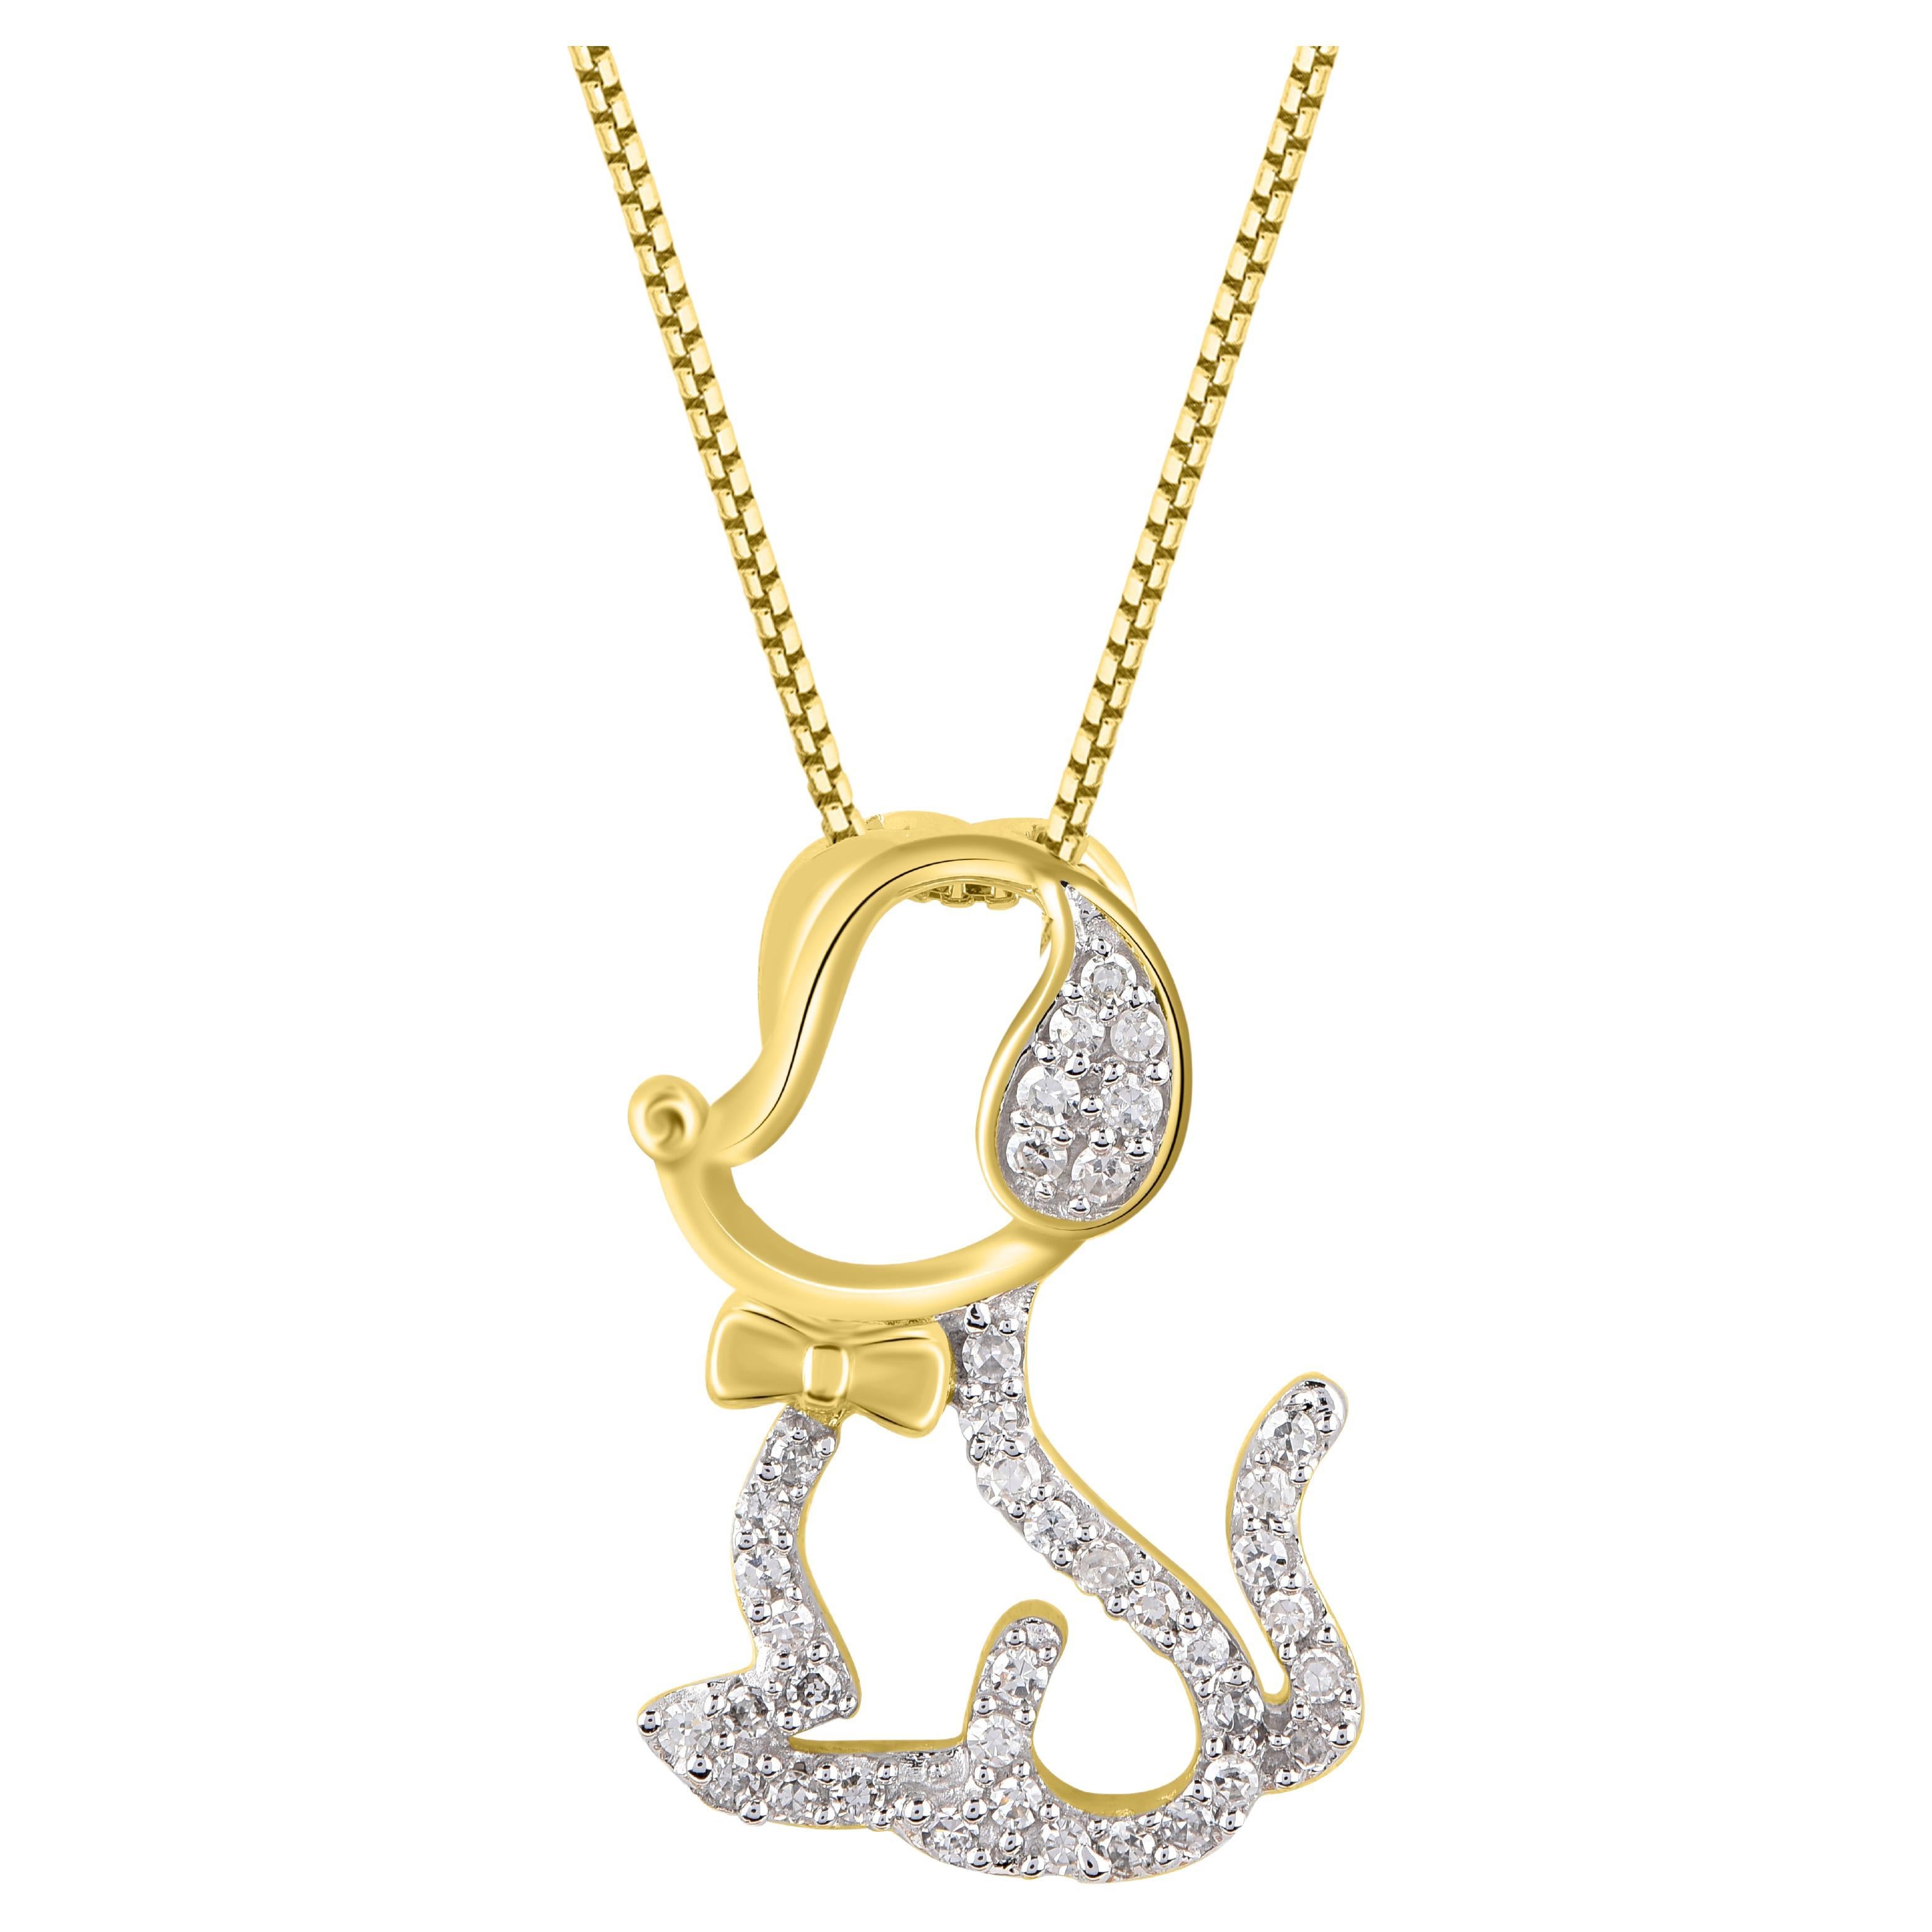 TJD 0.10 Carat Natural Round Diamond 14KT Yellow Gold Puppy Dog Pendant Necklace